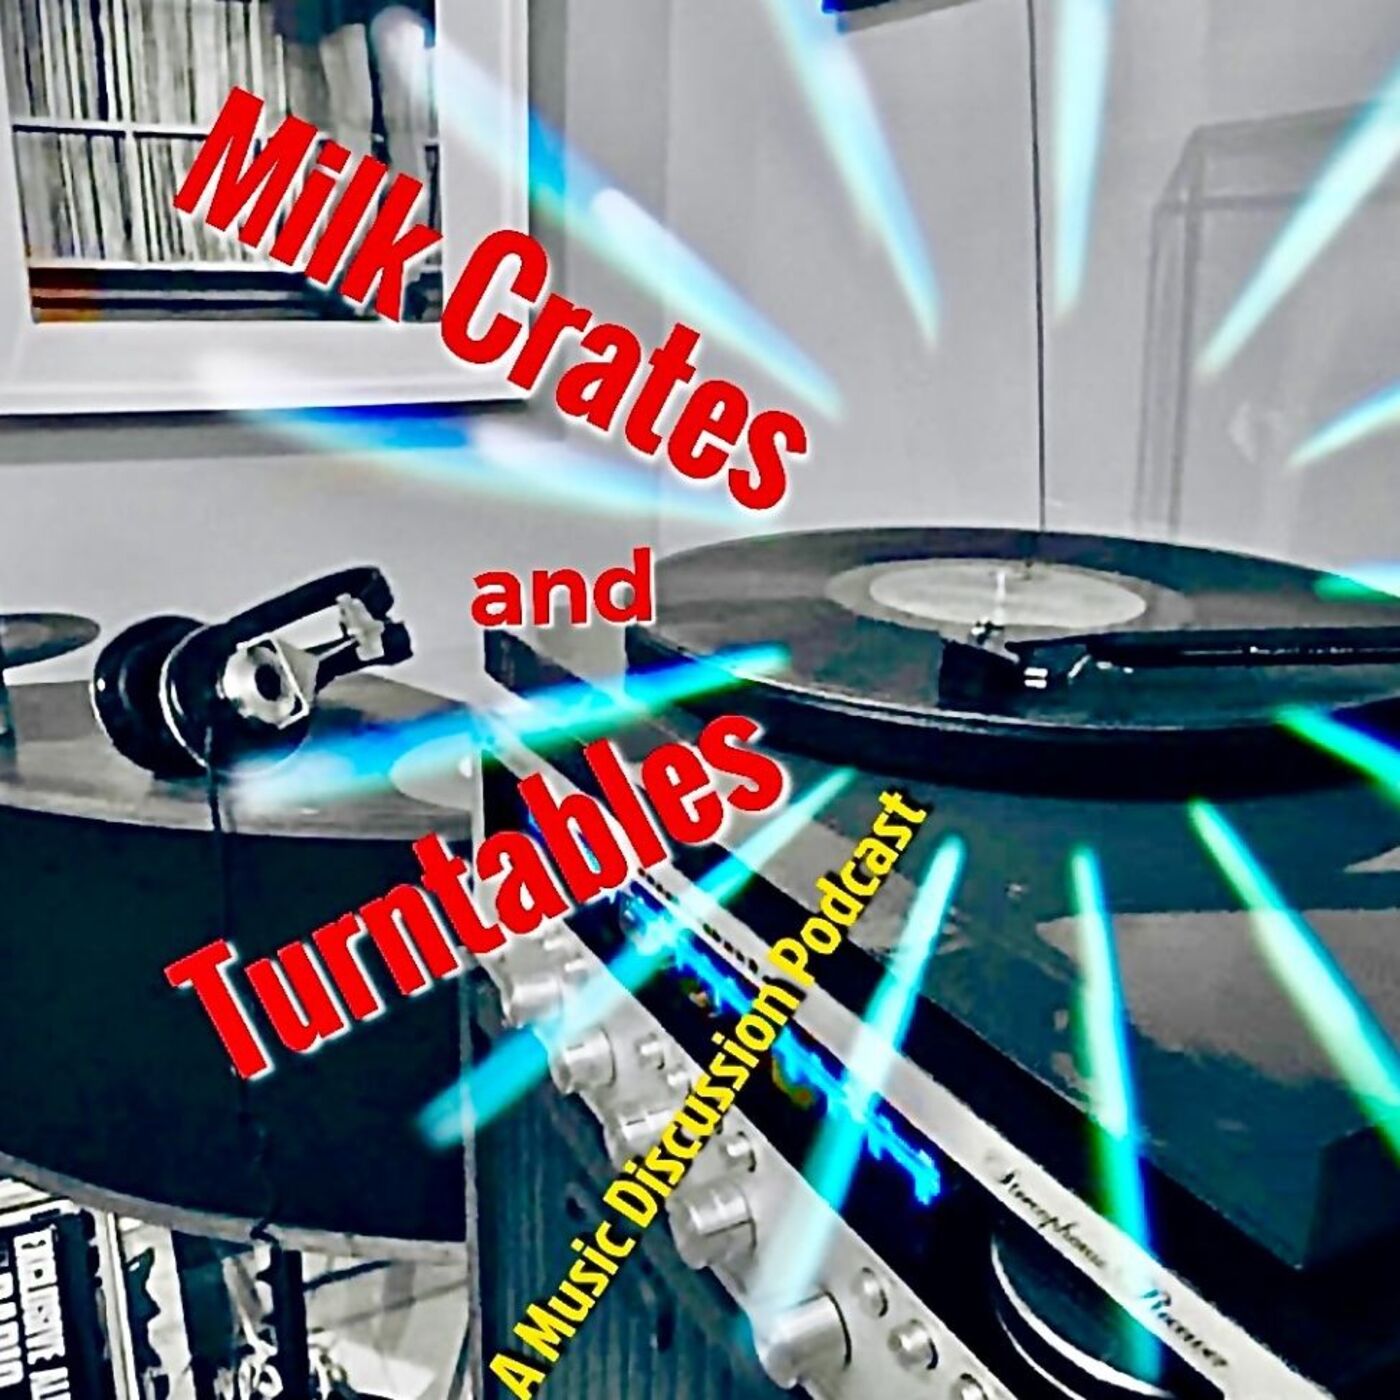 Fresh update on "frank sinatra" discussed on Milk Crates and Turntables. A Music Discussion Podcast